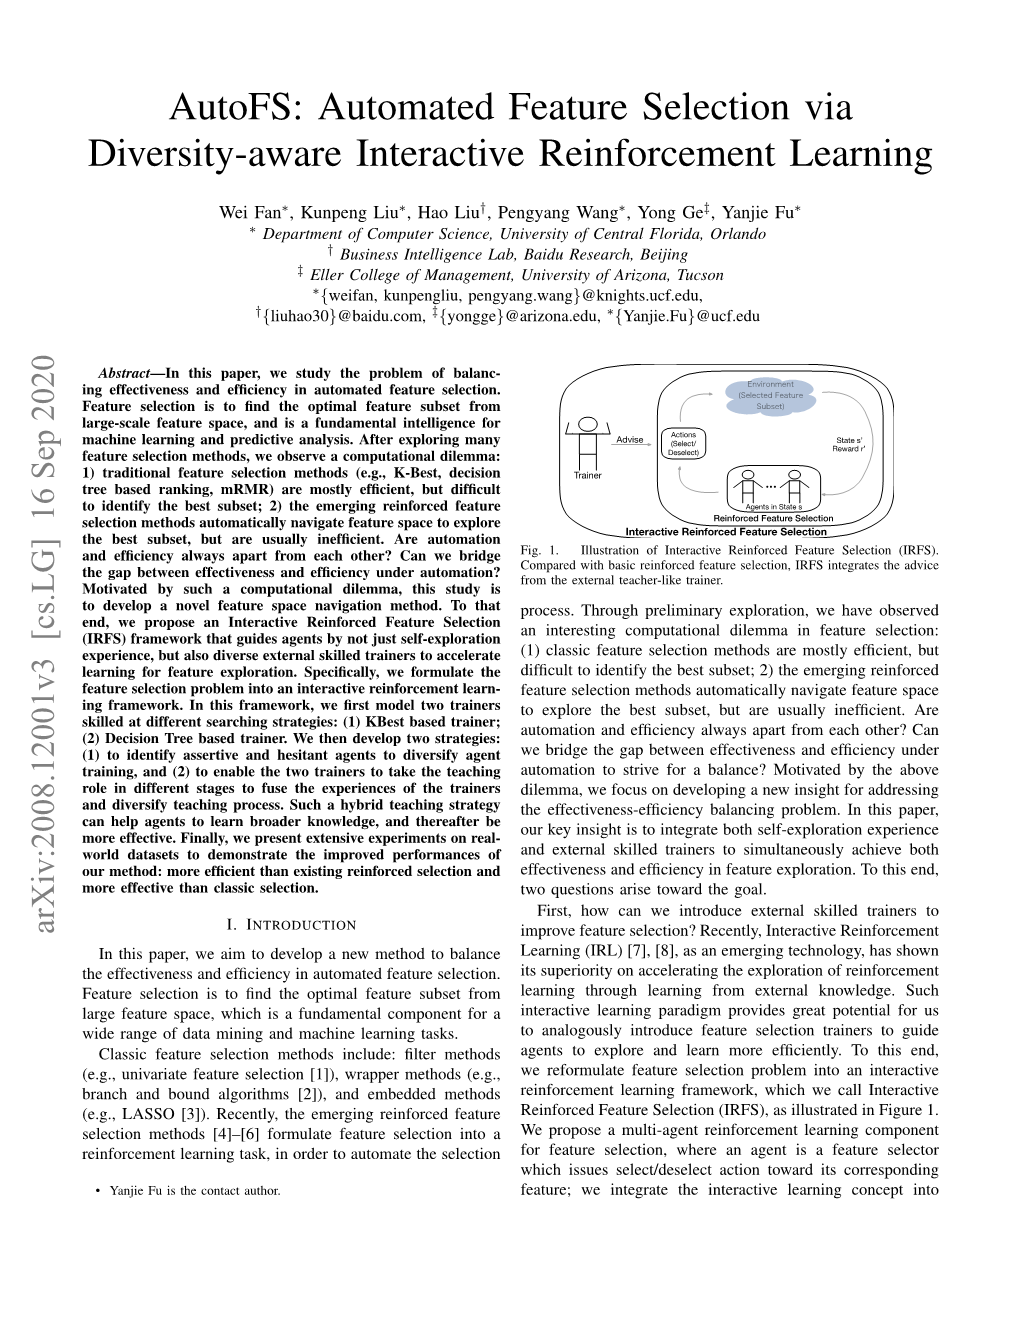 Automated Feature Selection Via Diversity-Aware Interactive Reinforcement Learning